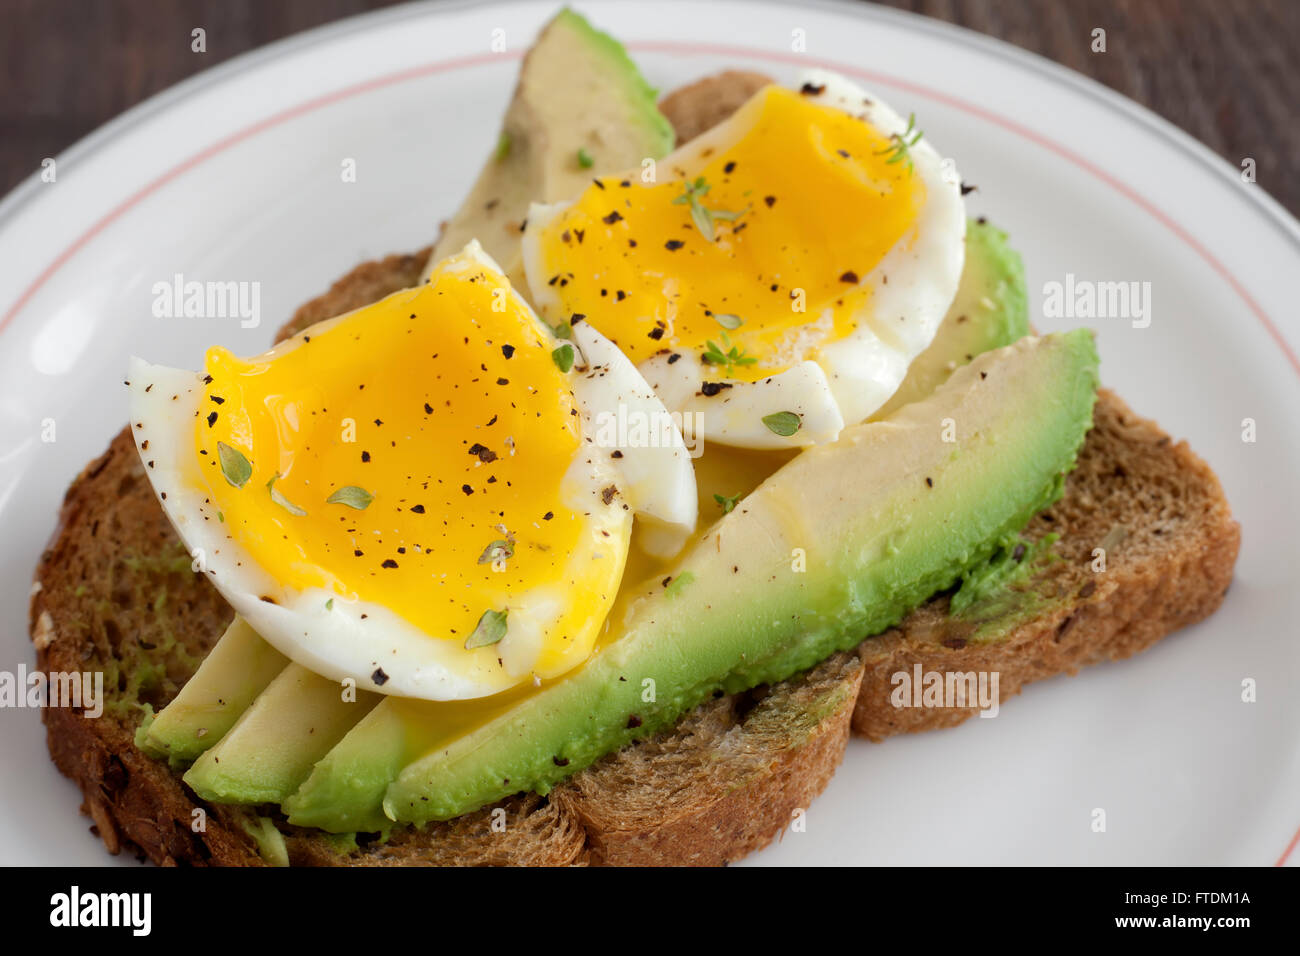 Poached egg on brown bread toast and avocado. Stock Photo